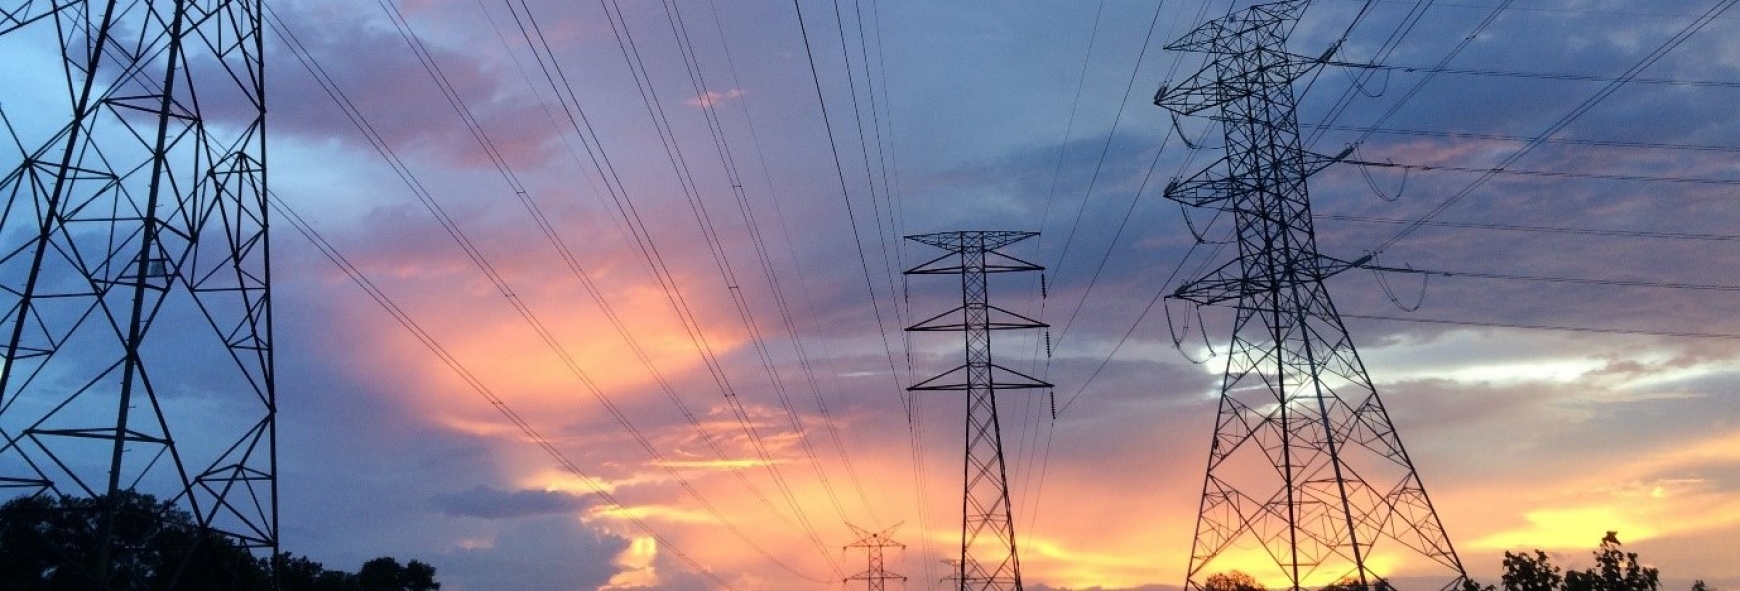 Electricity pylons with a sunset in the background